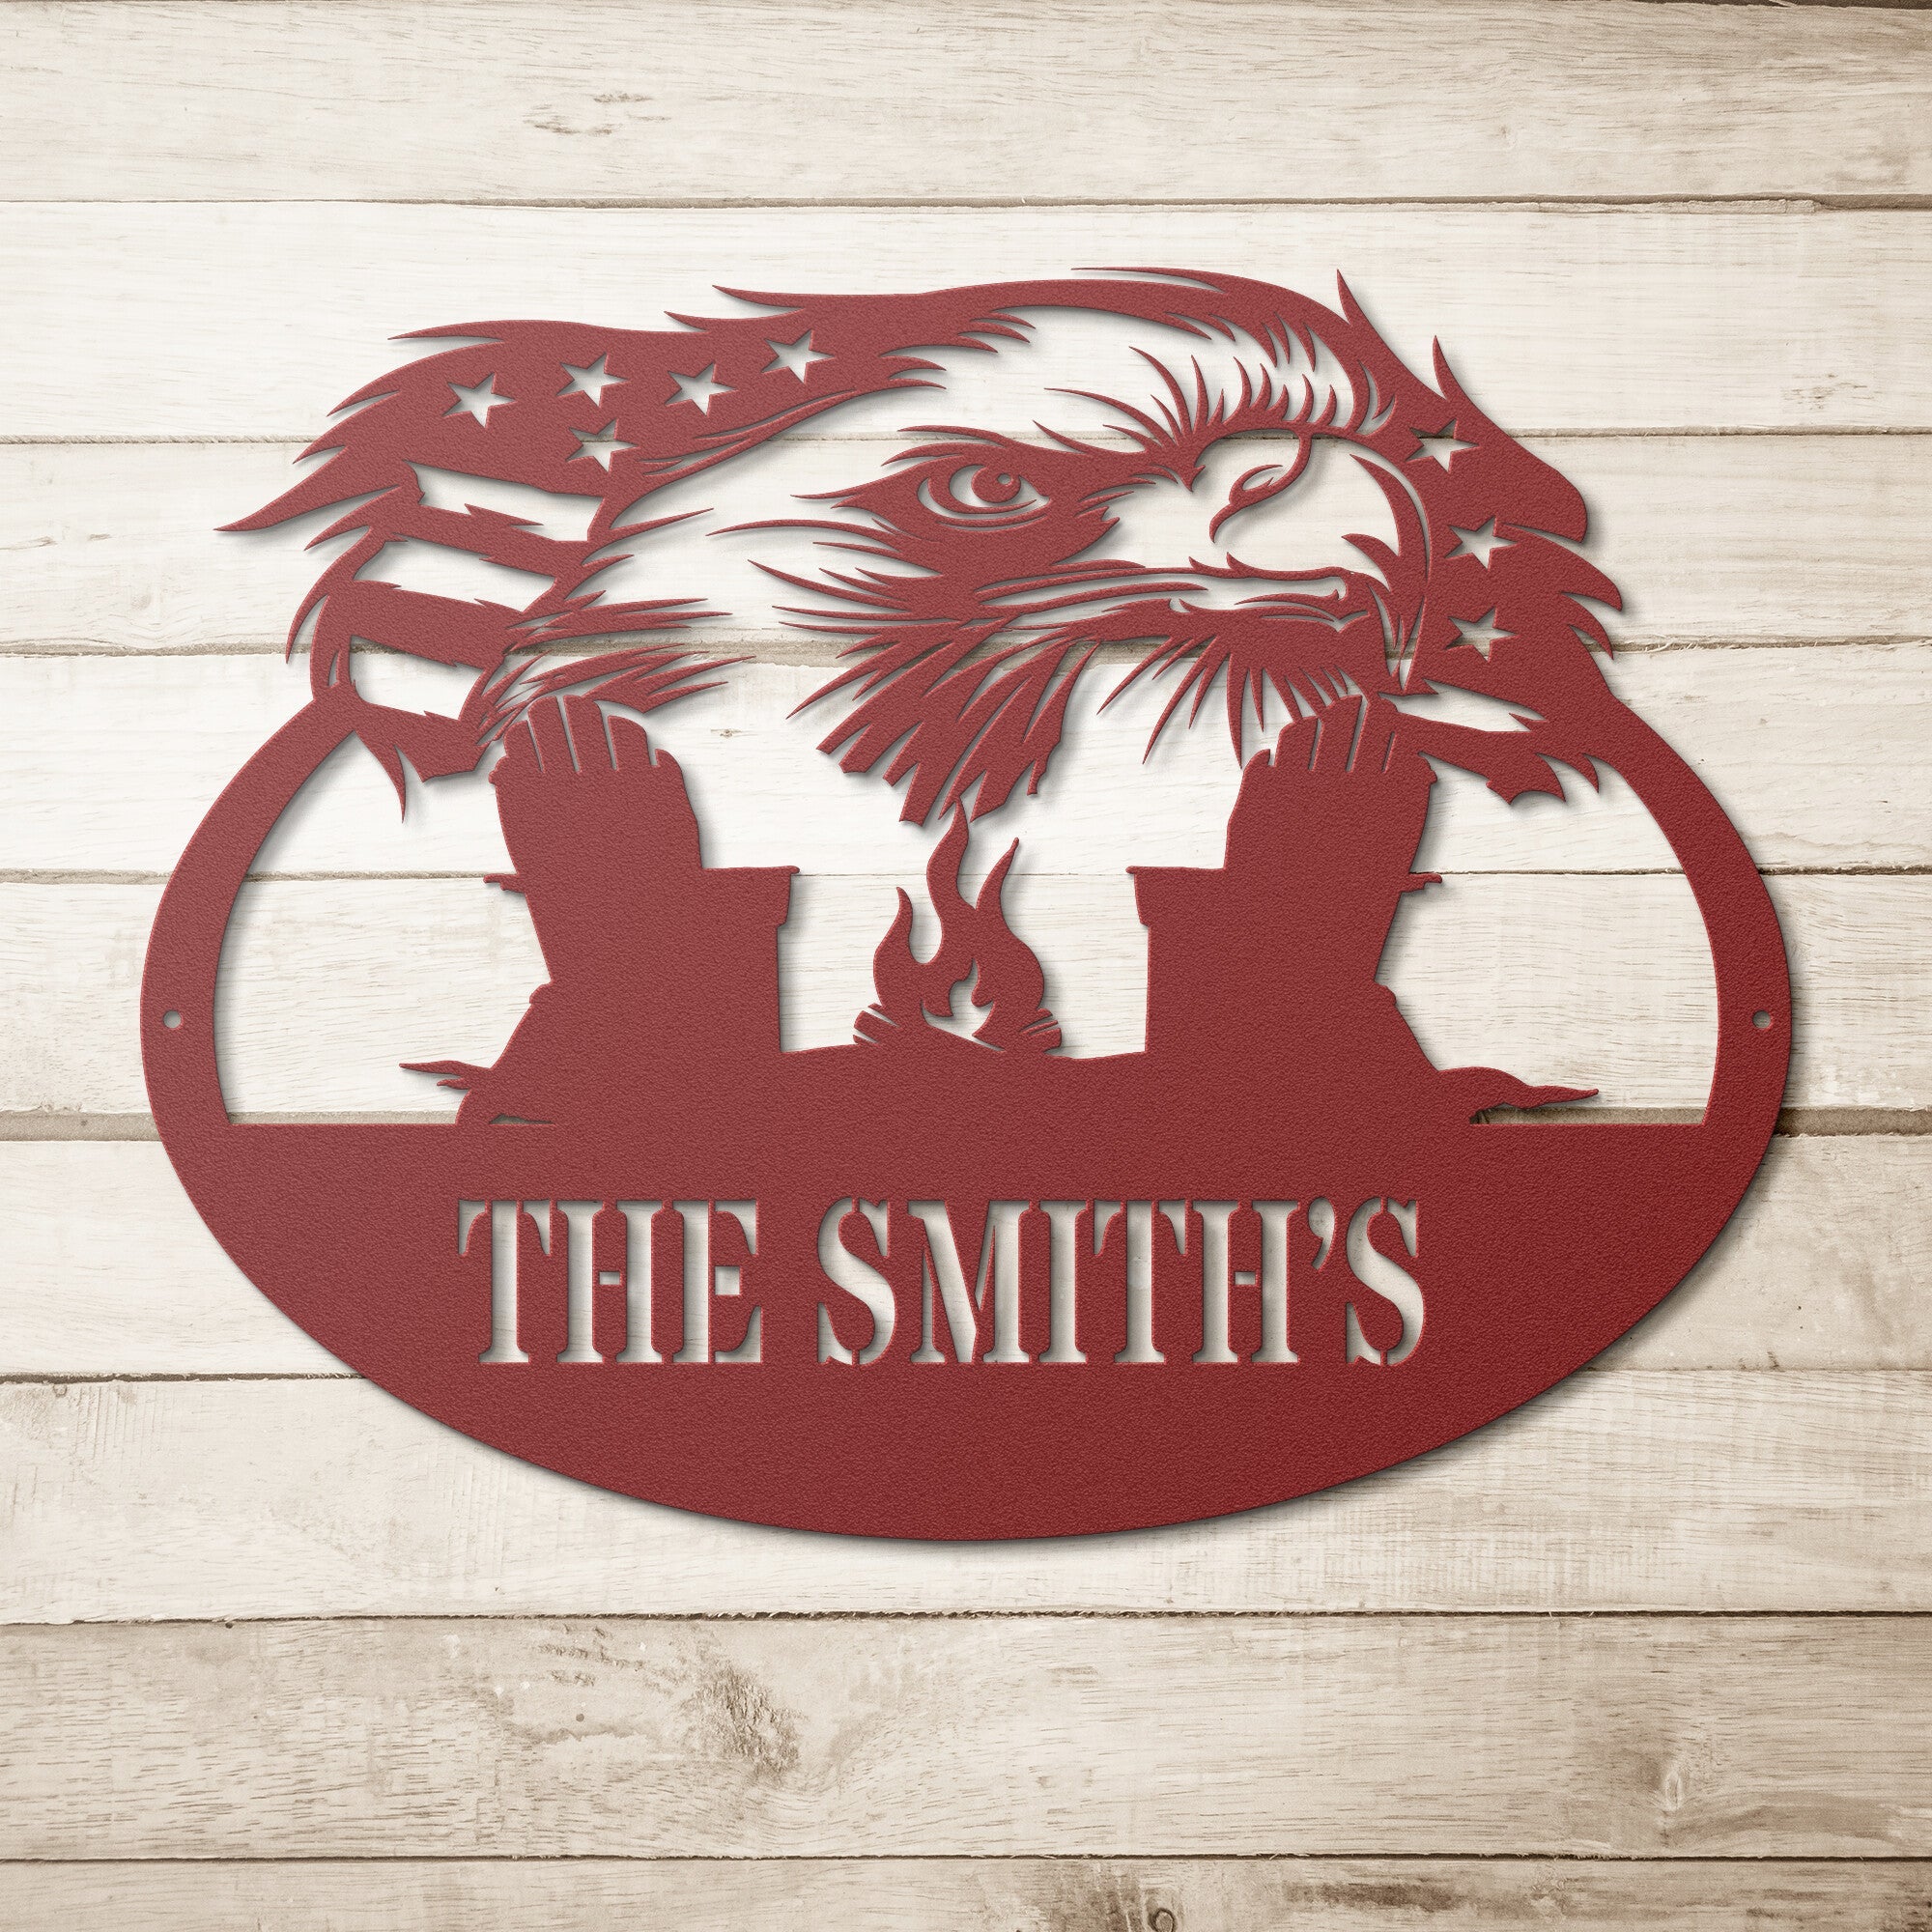 Personalized Eagle Fire Pit Sign - Cool Metal Signs